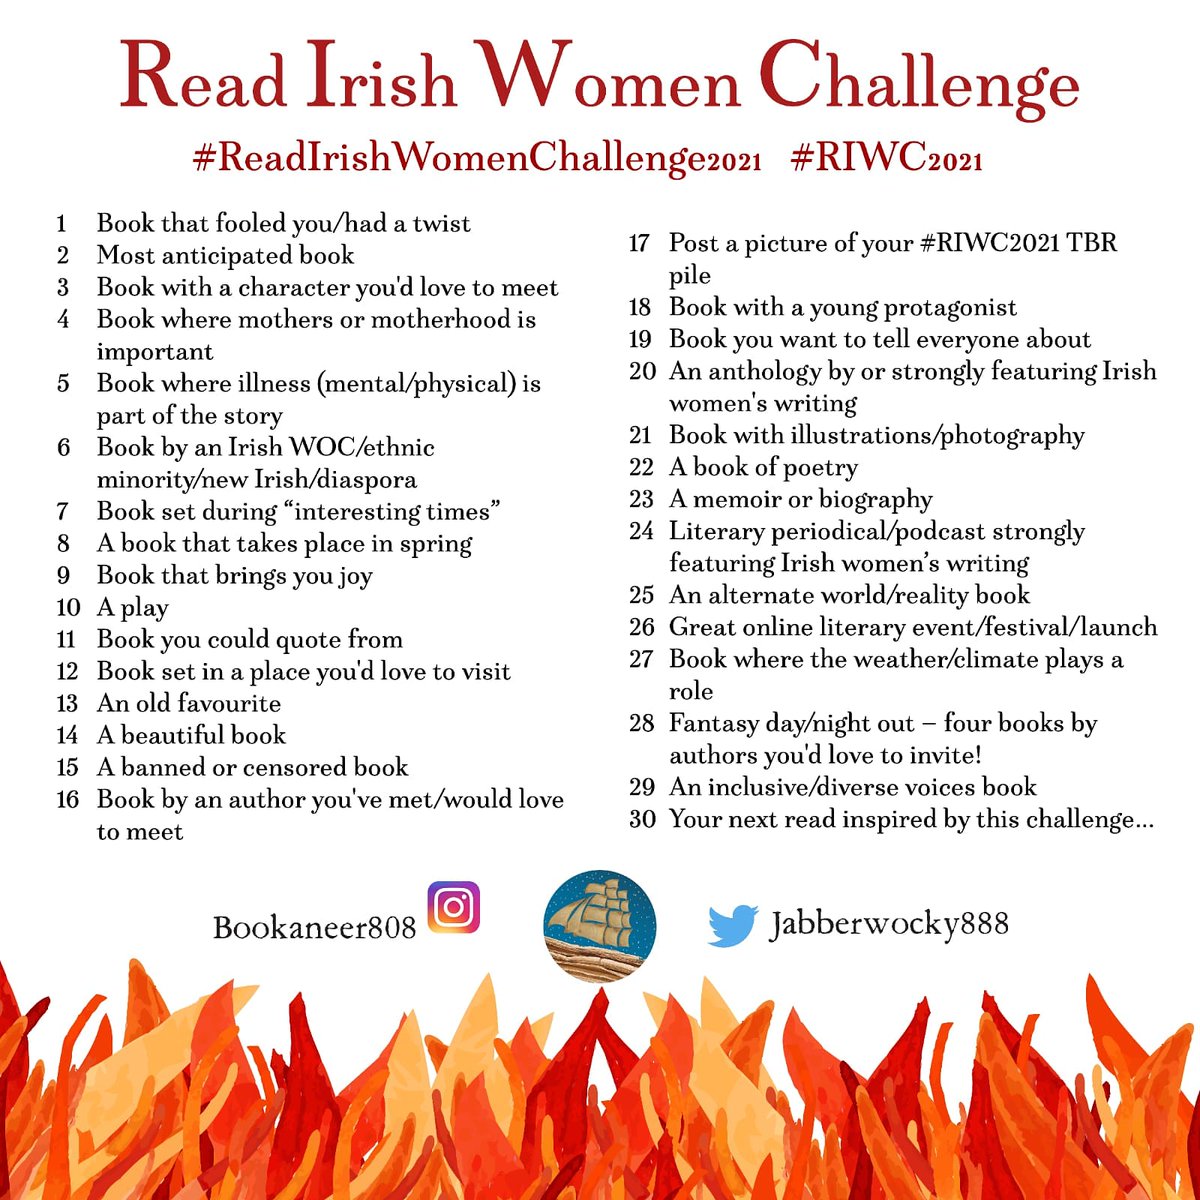 Day 24 of the  #ReadIrishWomenChallenge2021: podcast featuring women's writingForever YA podcast ( @ForeverYAPod) by  @epic_ciara and  @aifekearnsmchA podcast filled with book chats focusing on YA novels? Yes please??